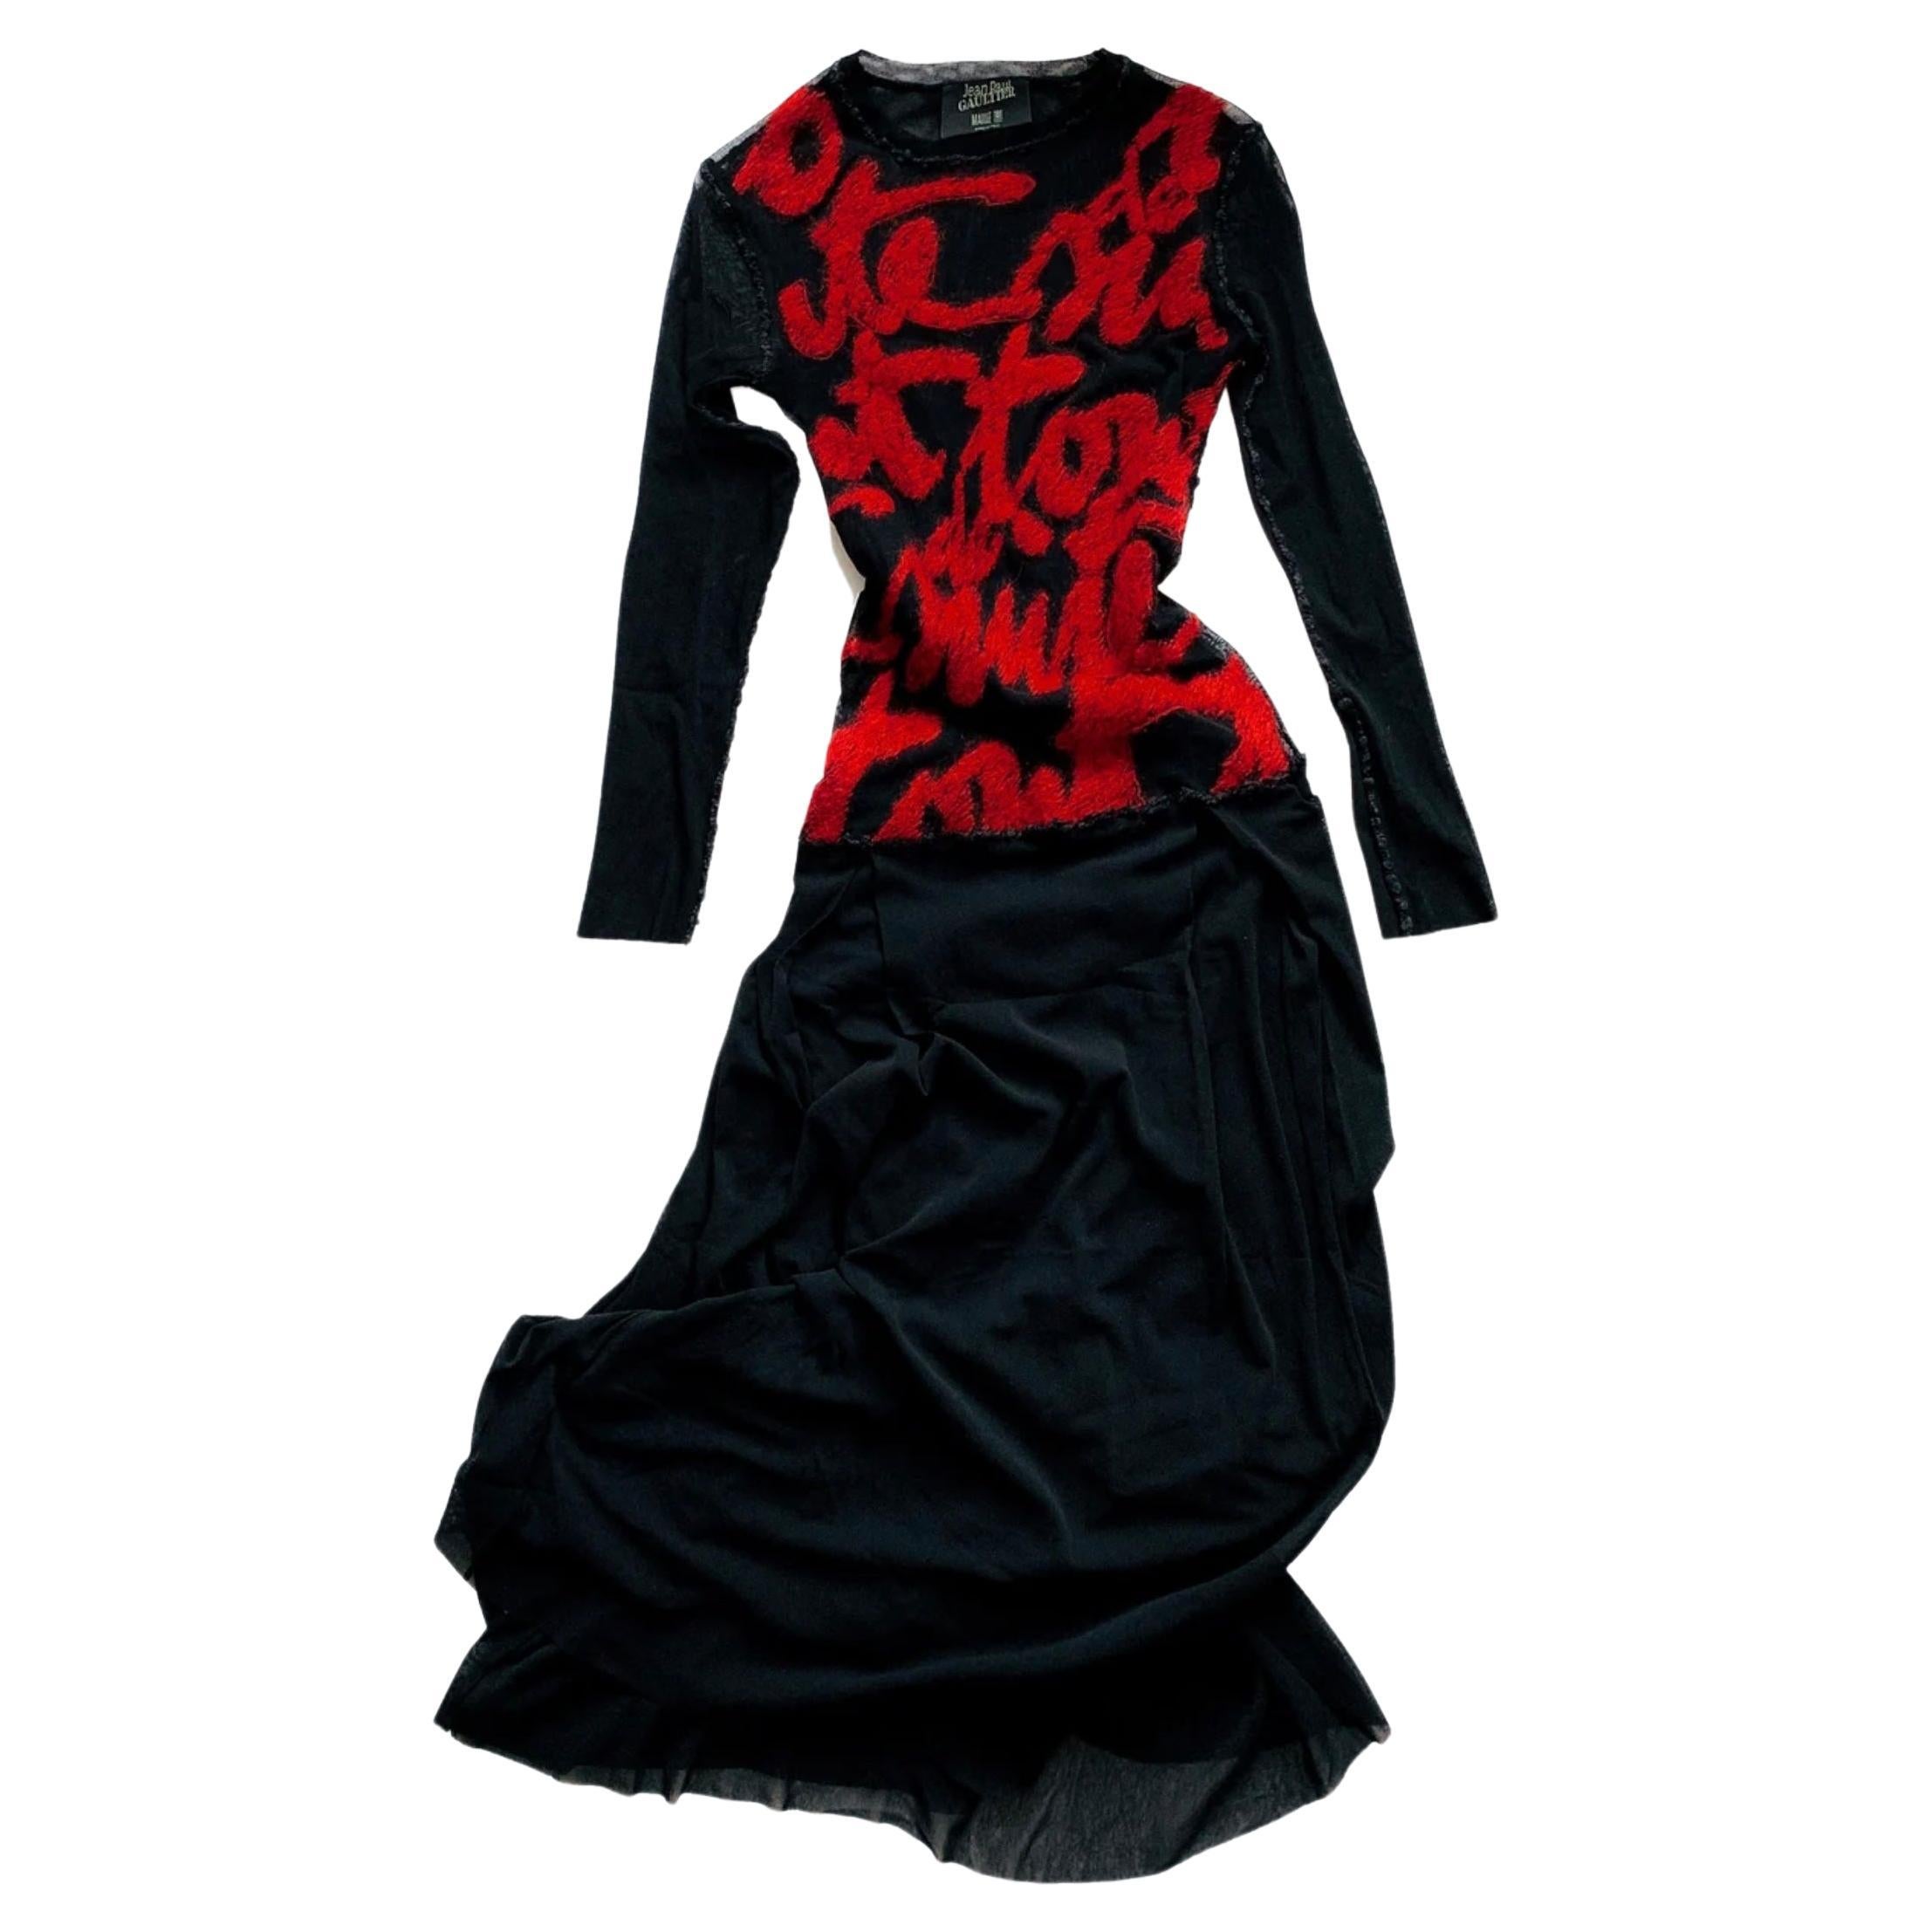 Jean Paul Gaultier Dress Mesh Black Sheer Red Writing Calligraphy 90s Vintage  For Sale